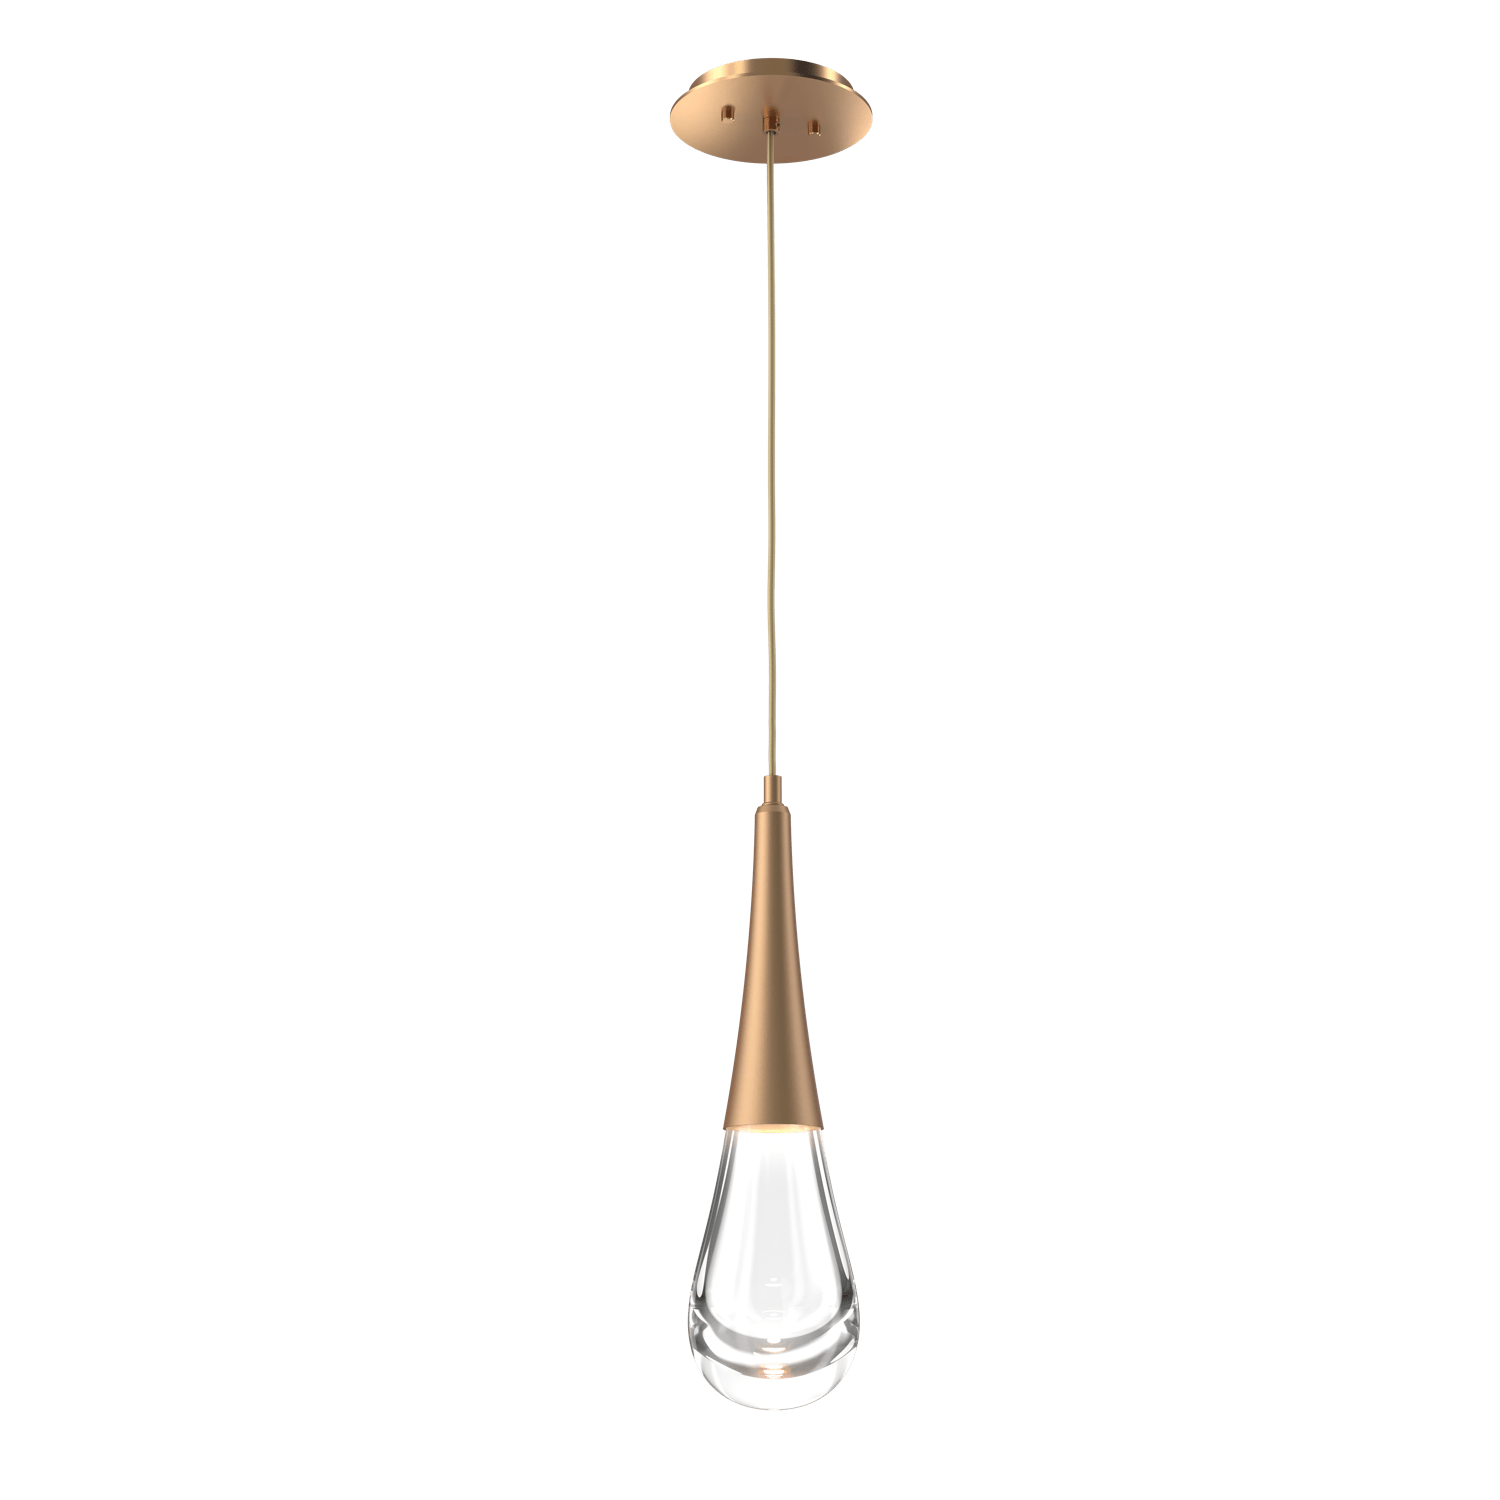 LAB0078-01-NB-Hammerton-Studio-Raindrop-pendant-light-with-novel-brass-finish-and-clear-blown-glass-shades-and-LED-lamping